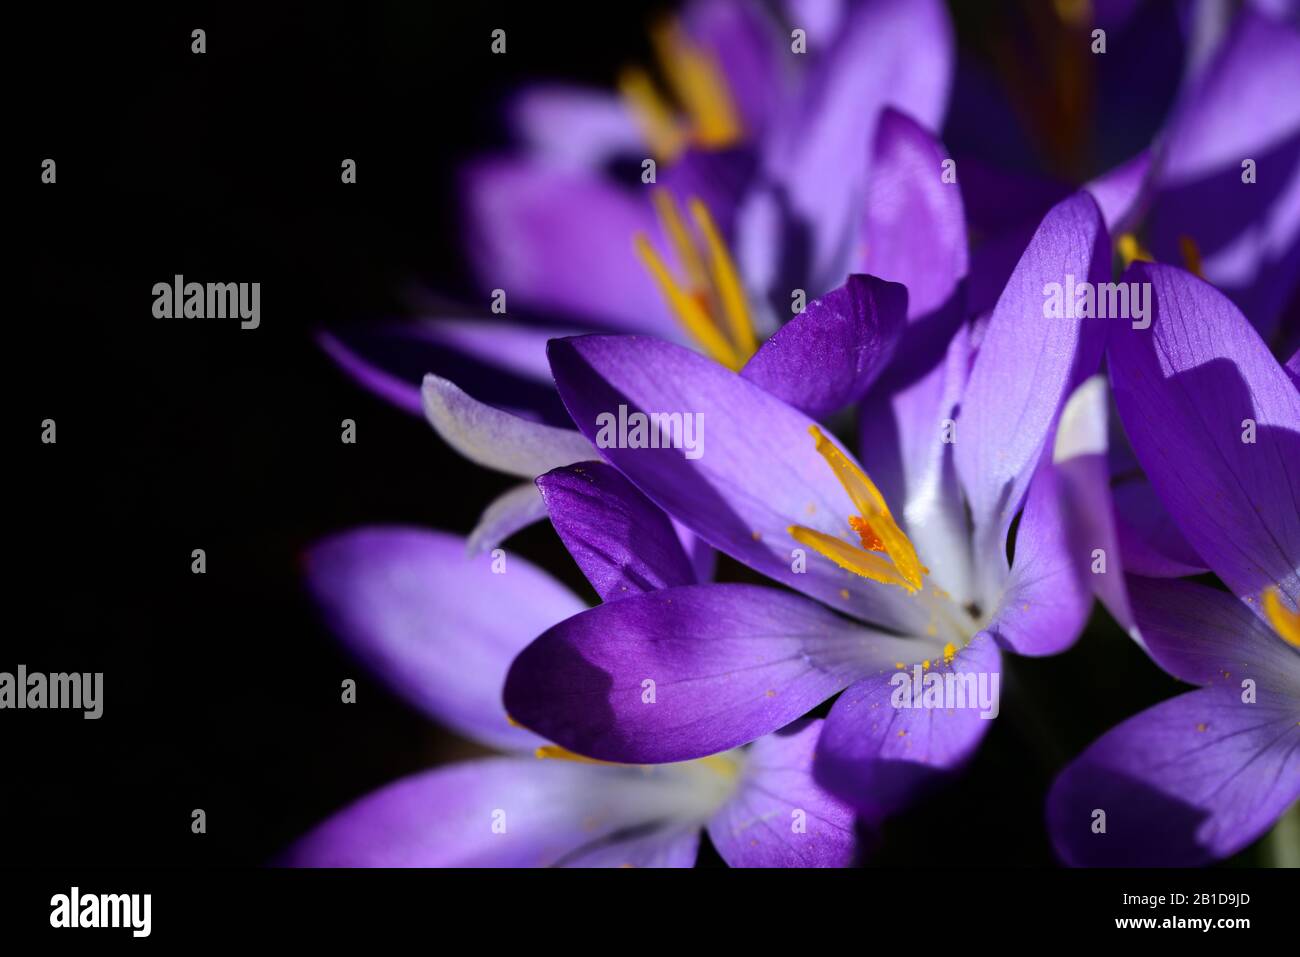 Close-up of purple blooming crocus, with opened petals and dainty seed threads in spring in the early bloom as a harbinger of hope, against a dark bac Stock Photo